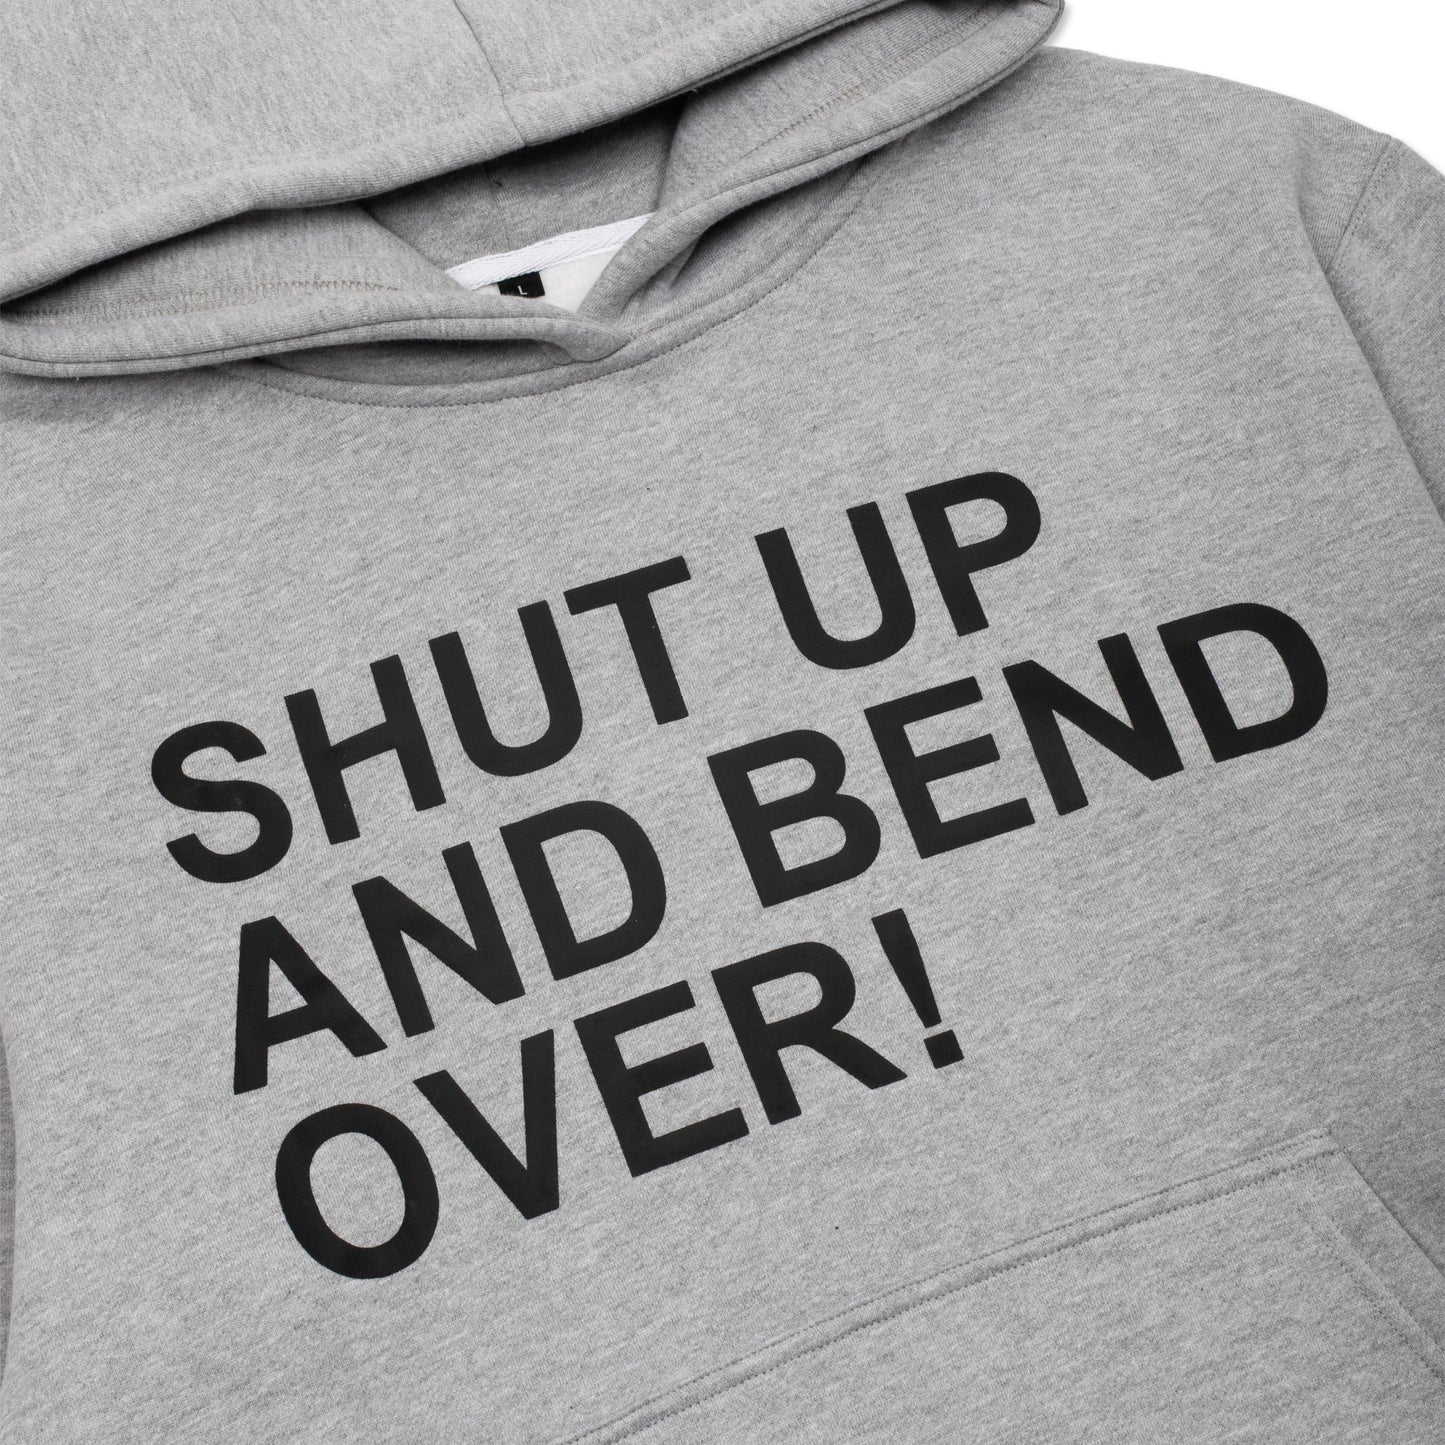 KiDi - "Shut Up And Bend Over" Hoodie (Grey)